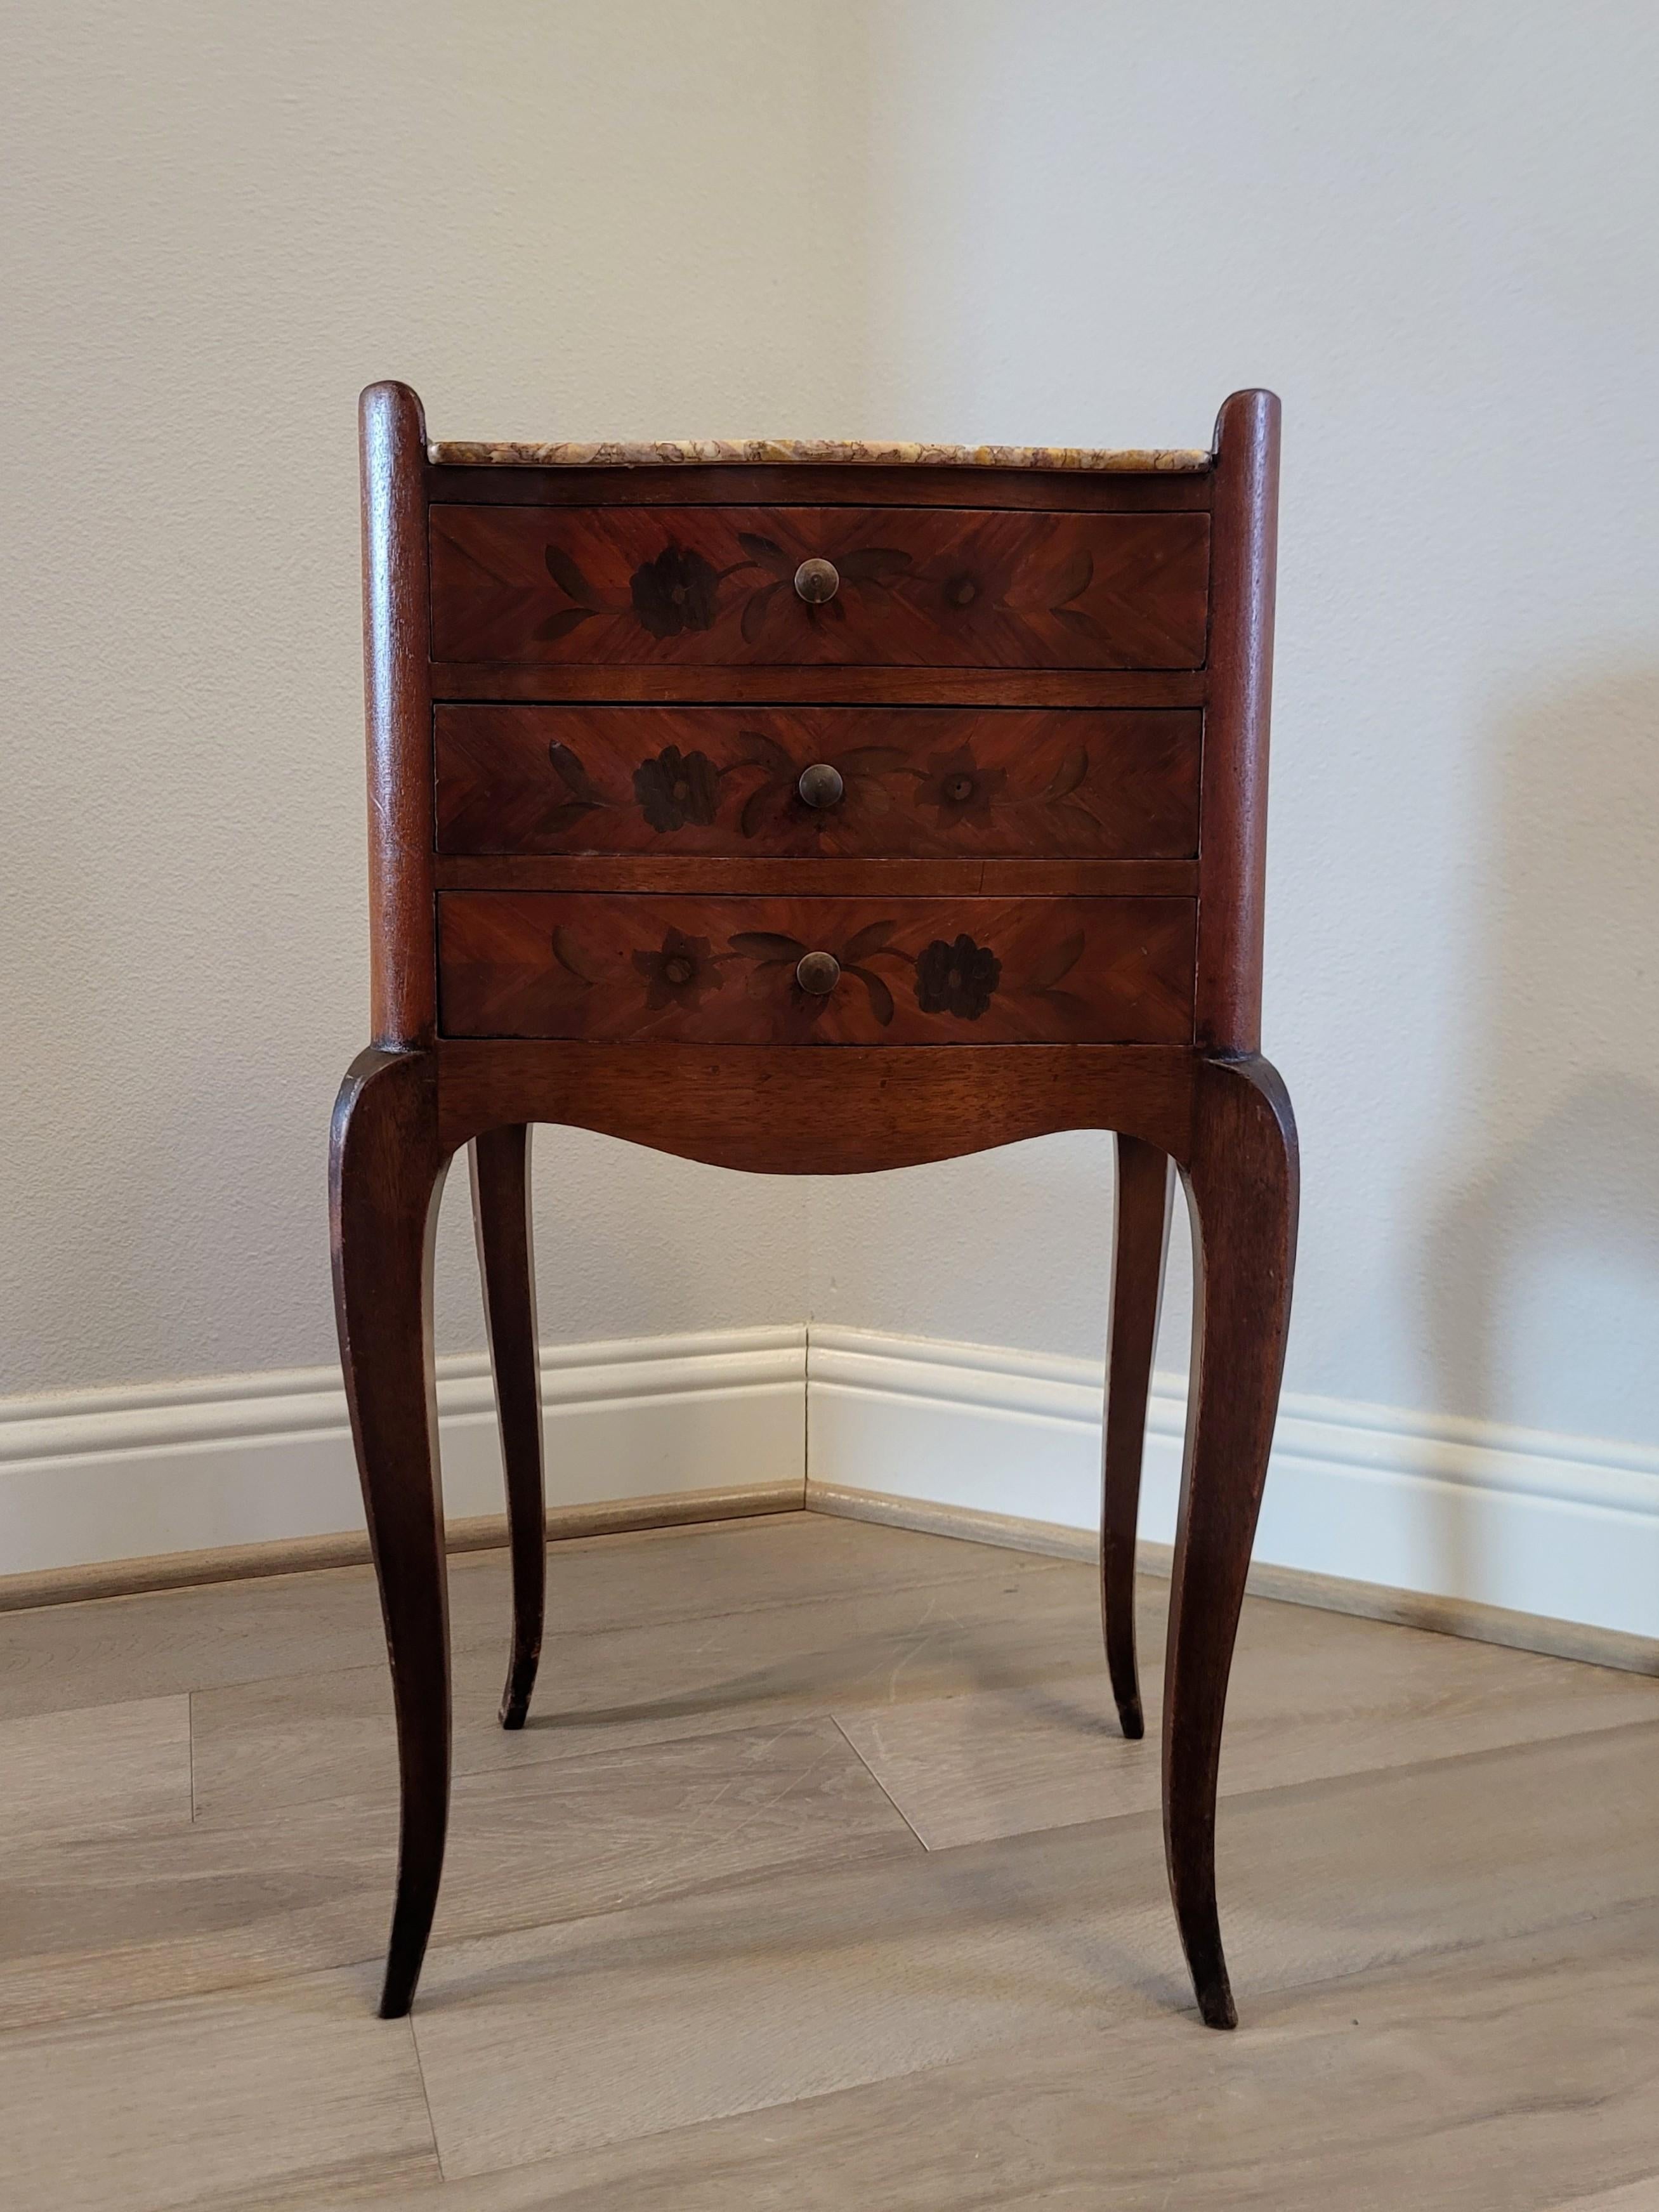 19th Century French Louis XV Style Marquetry Inlaid Nightstand Table In Good Condition For Sale In Forney, TX